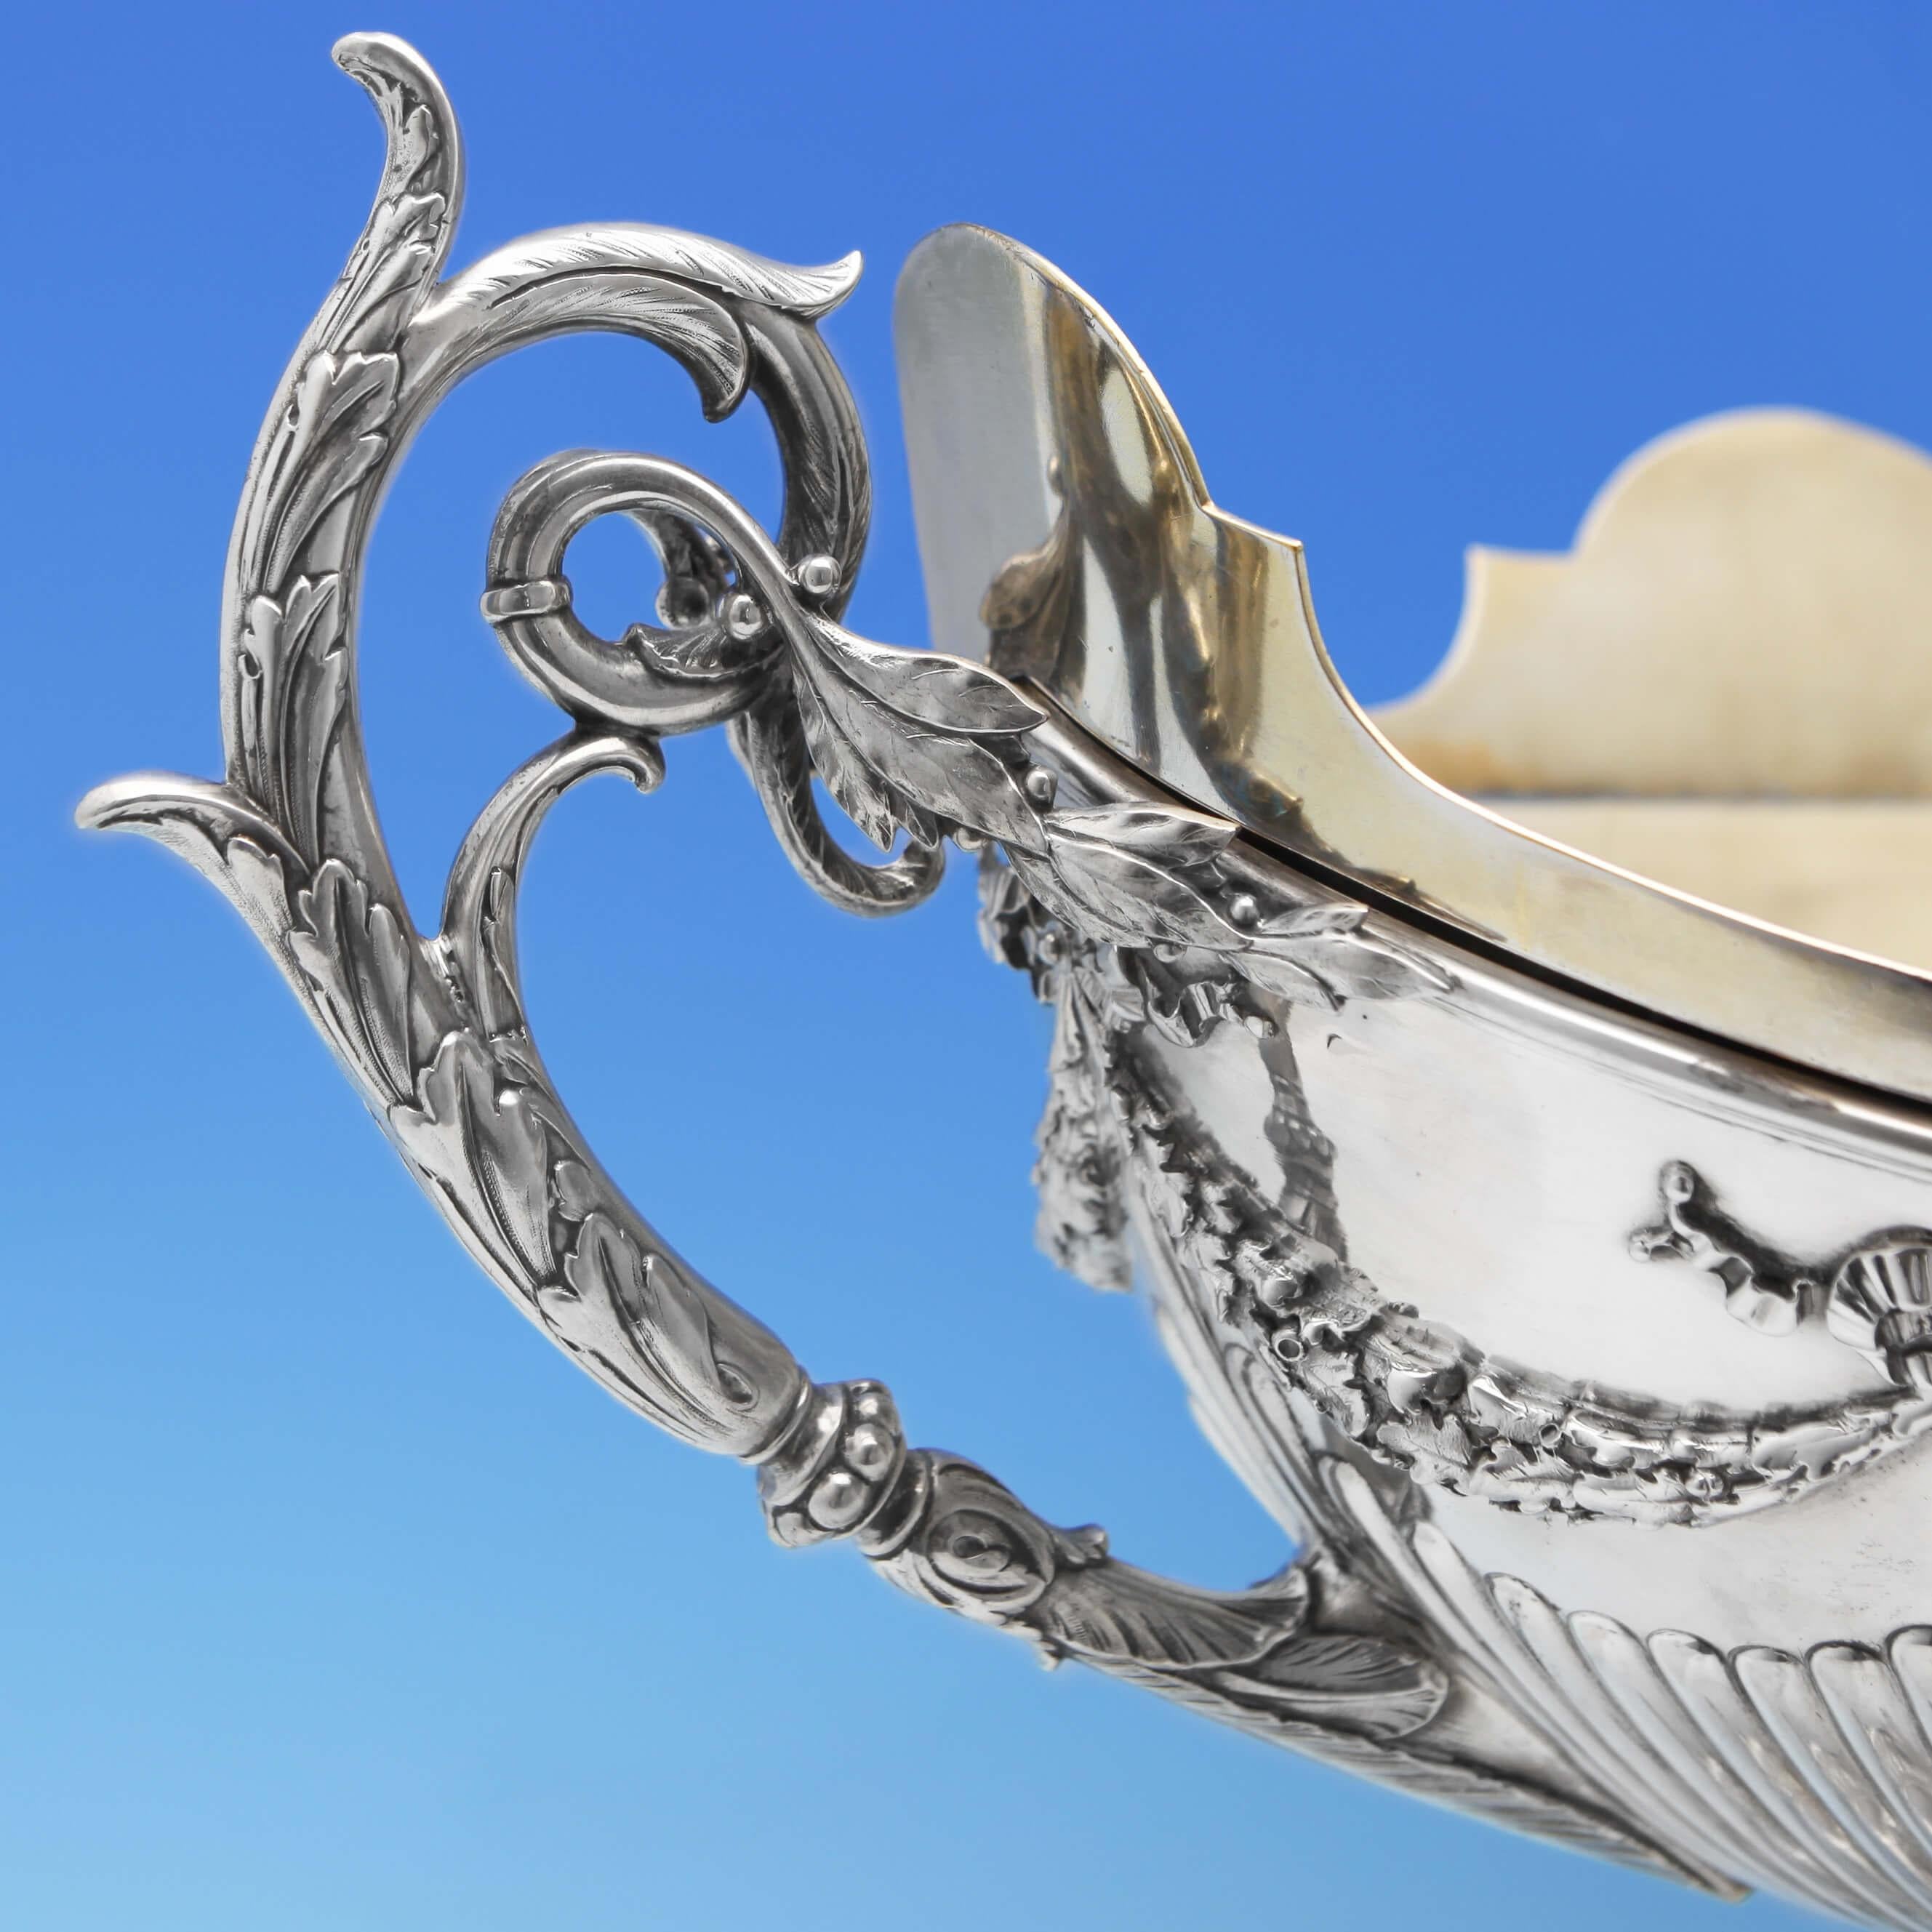 Made in Paris circa 1830 by Odiot, this spectacular 1st quality, French Antique, silver centrepiece jardinière and plateau, has an oval bowl beautifully detailed with fluting, floral garland swags and applied bows, standing on a round pedestal base